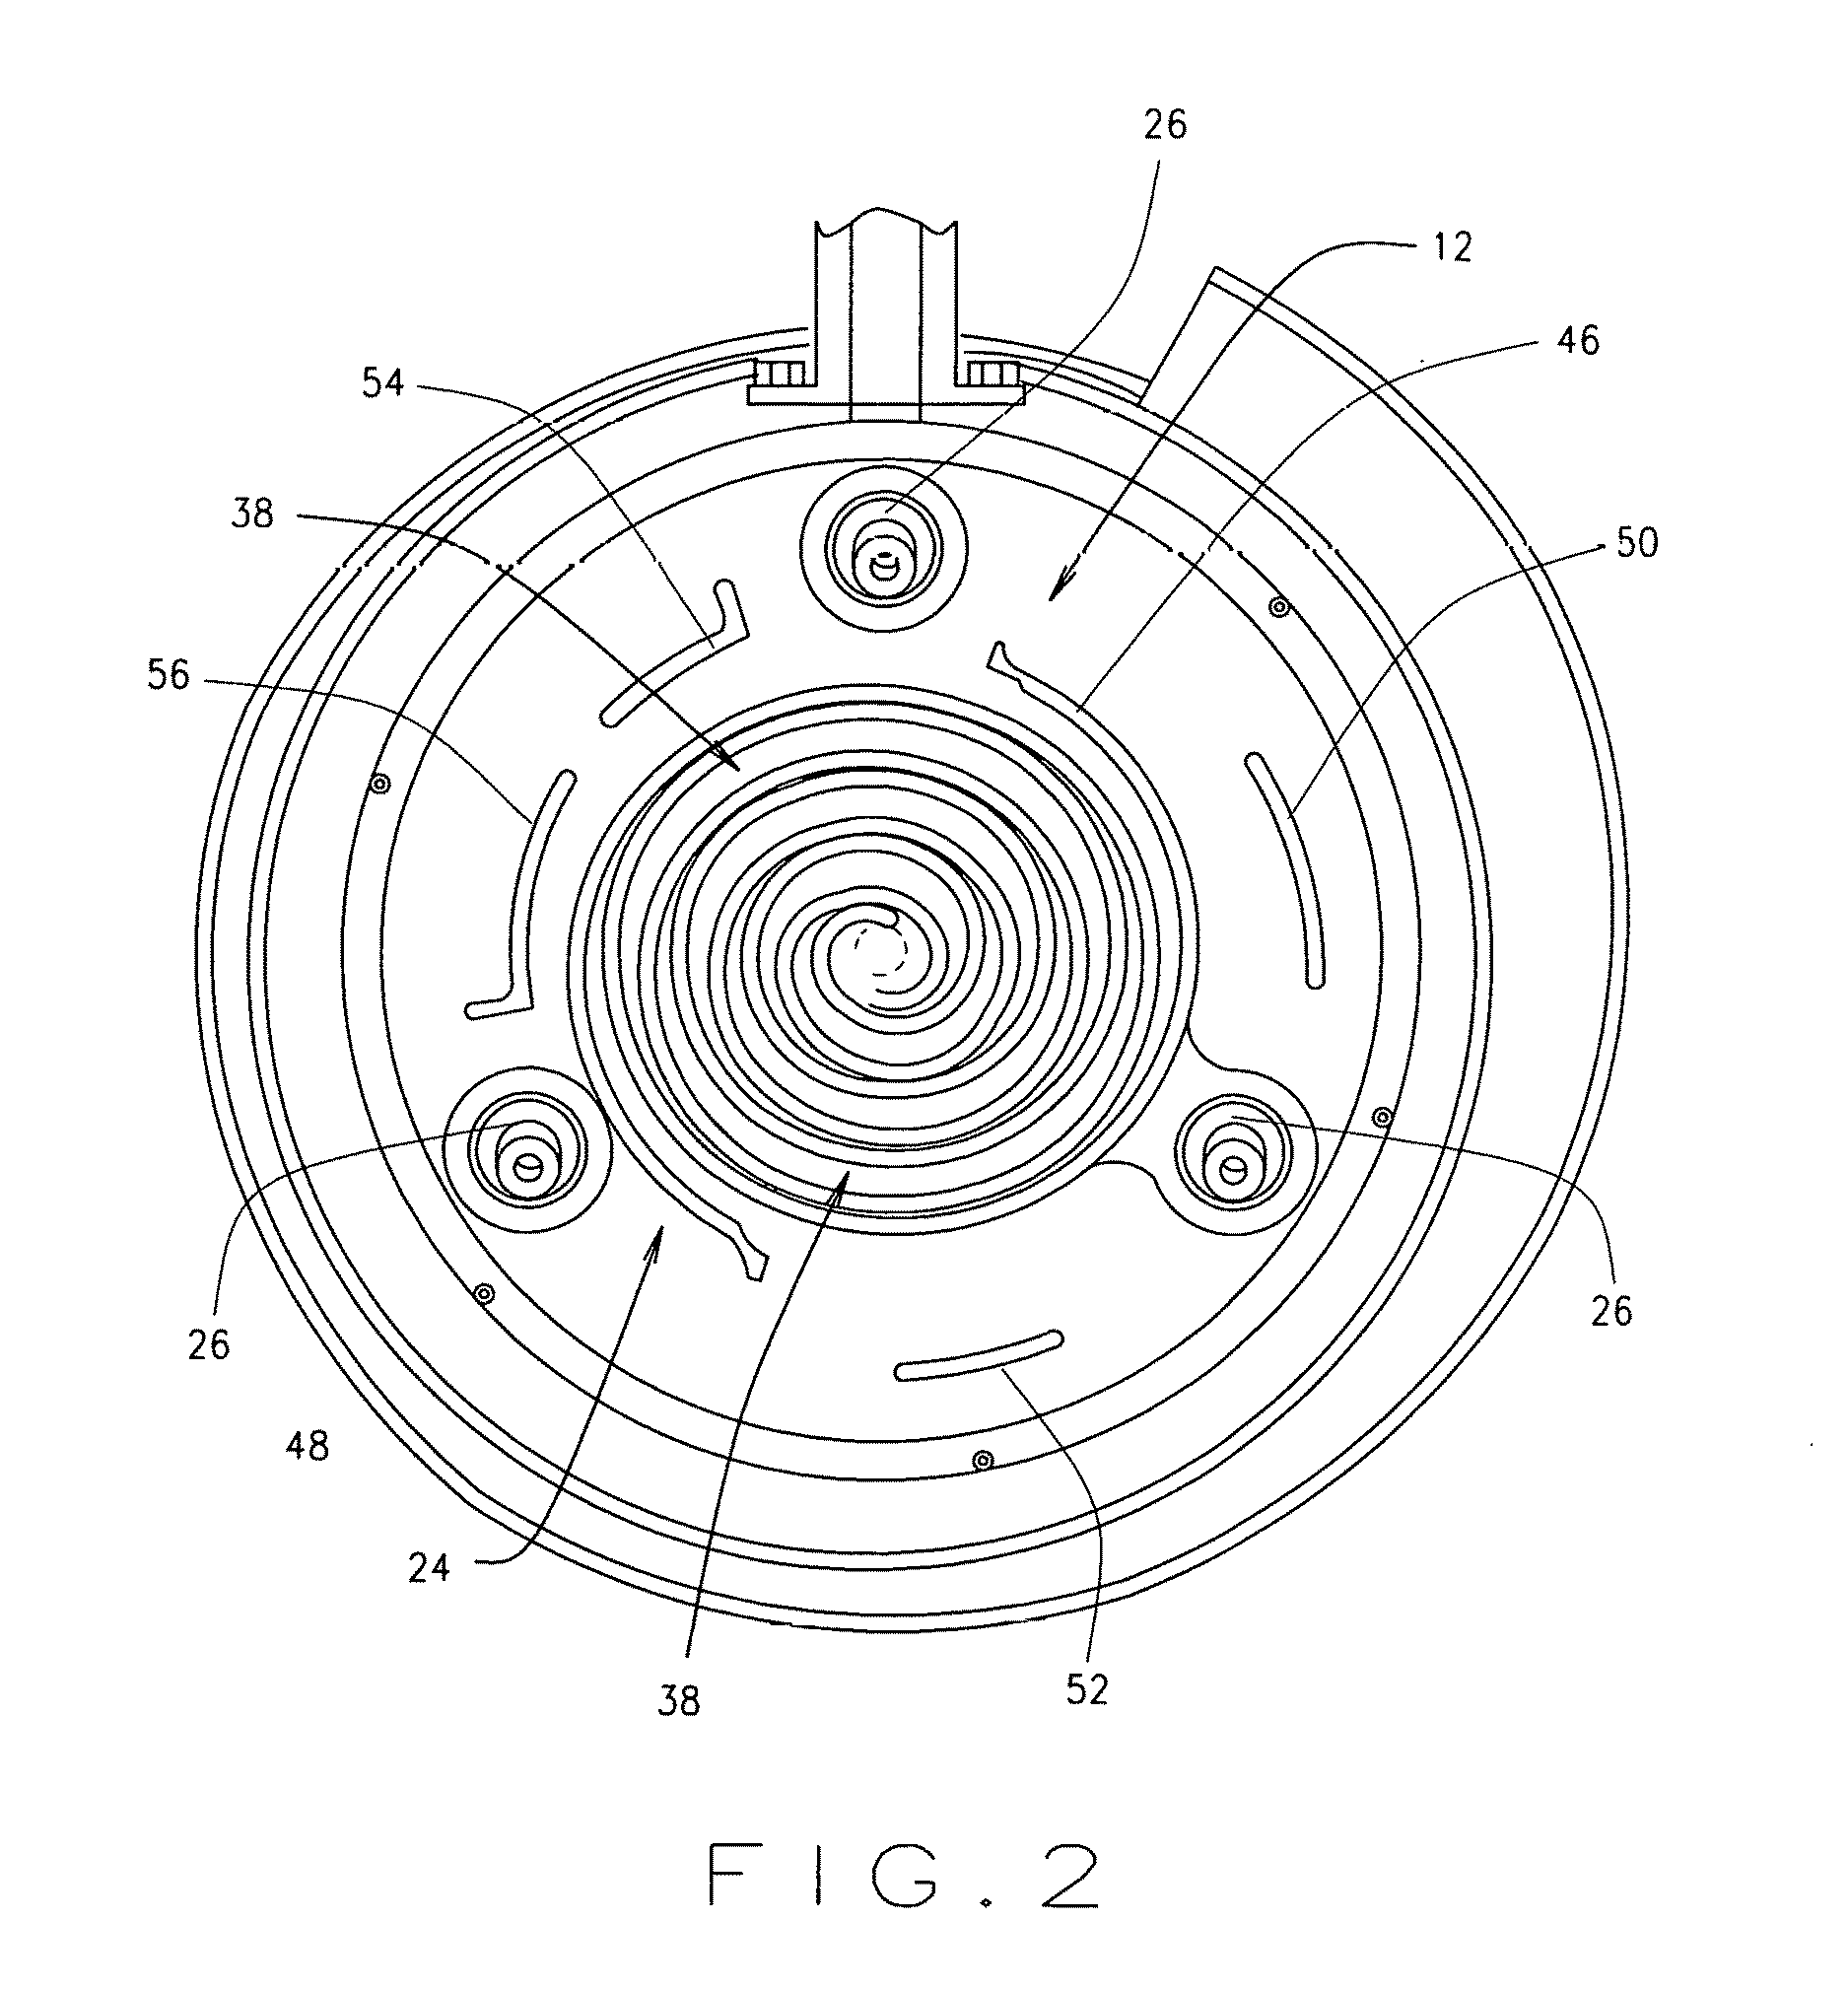 Scroll type device incorporating spinning or co-rotating scrolls